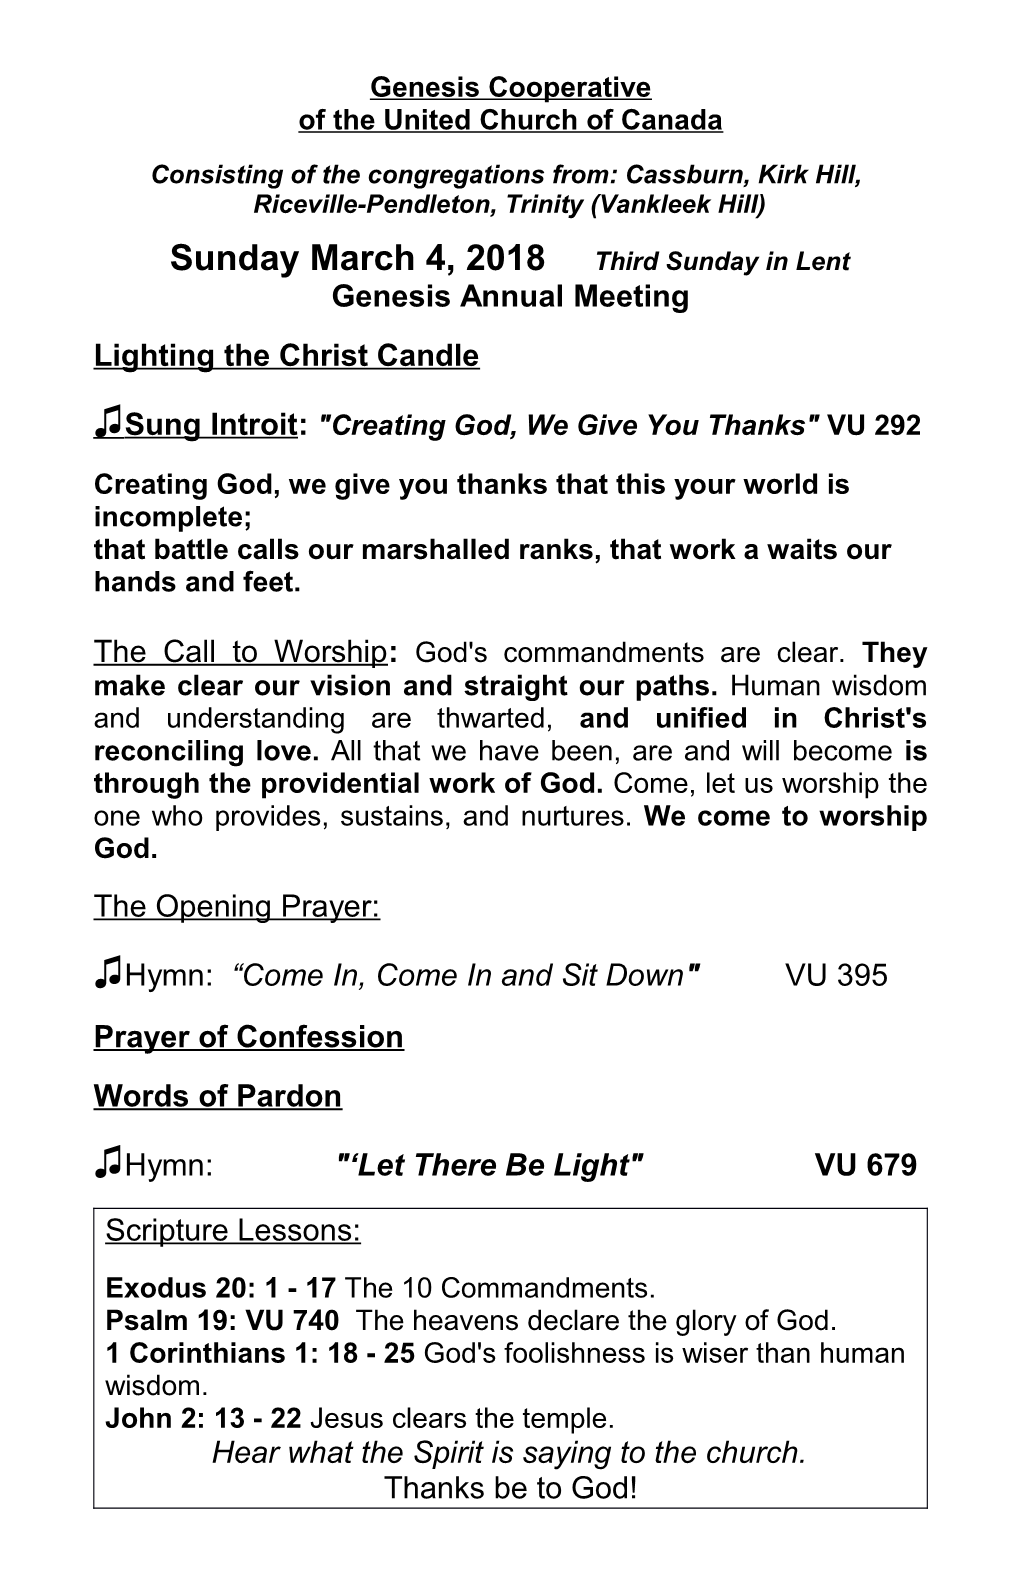 Consisting of the Congregations From:Cassburn, Kirk Hill